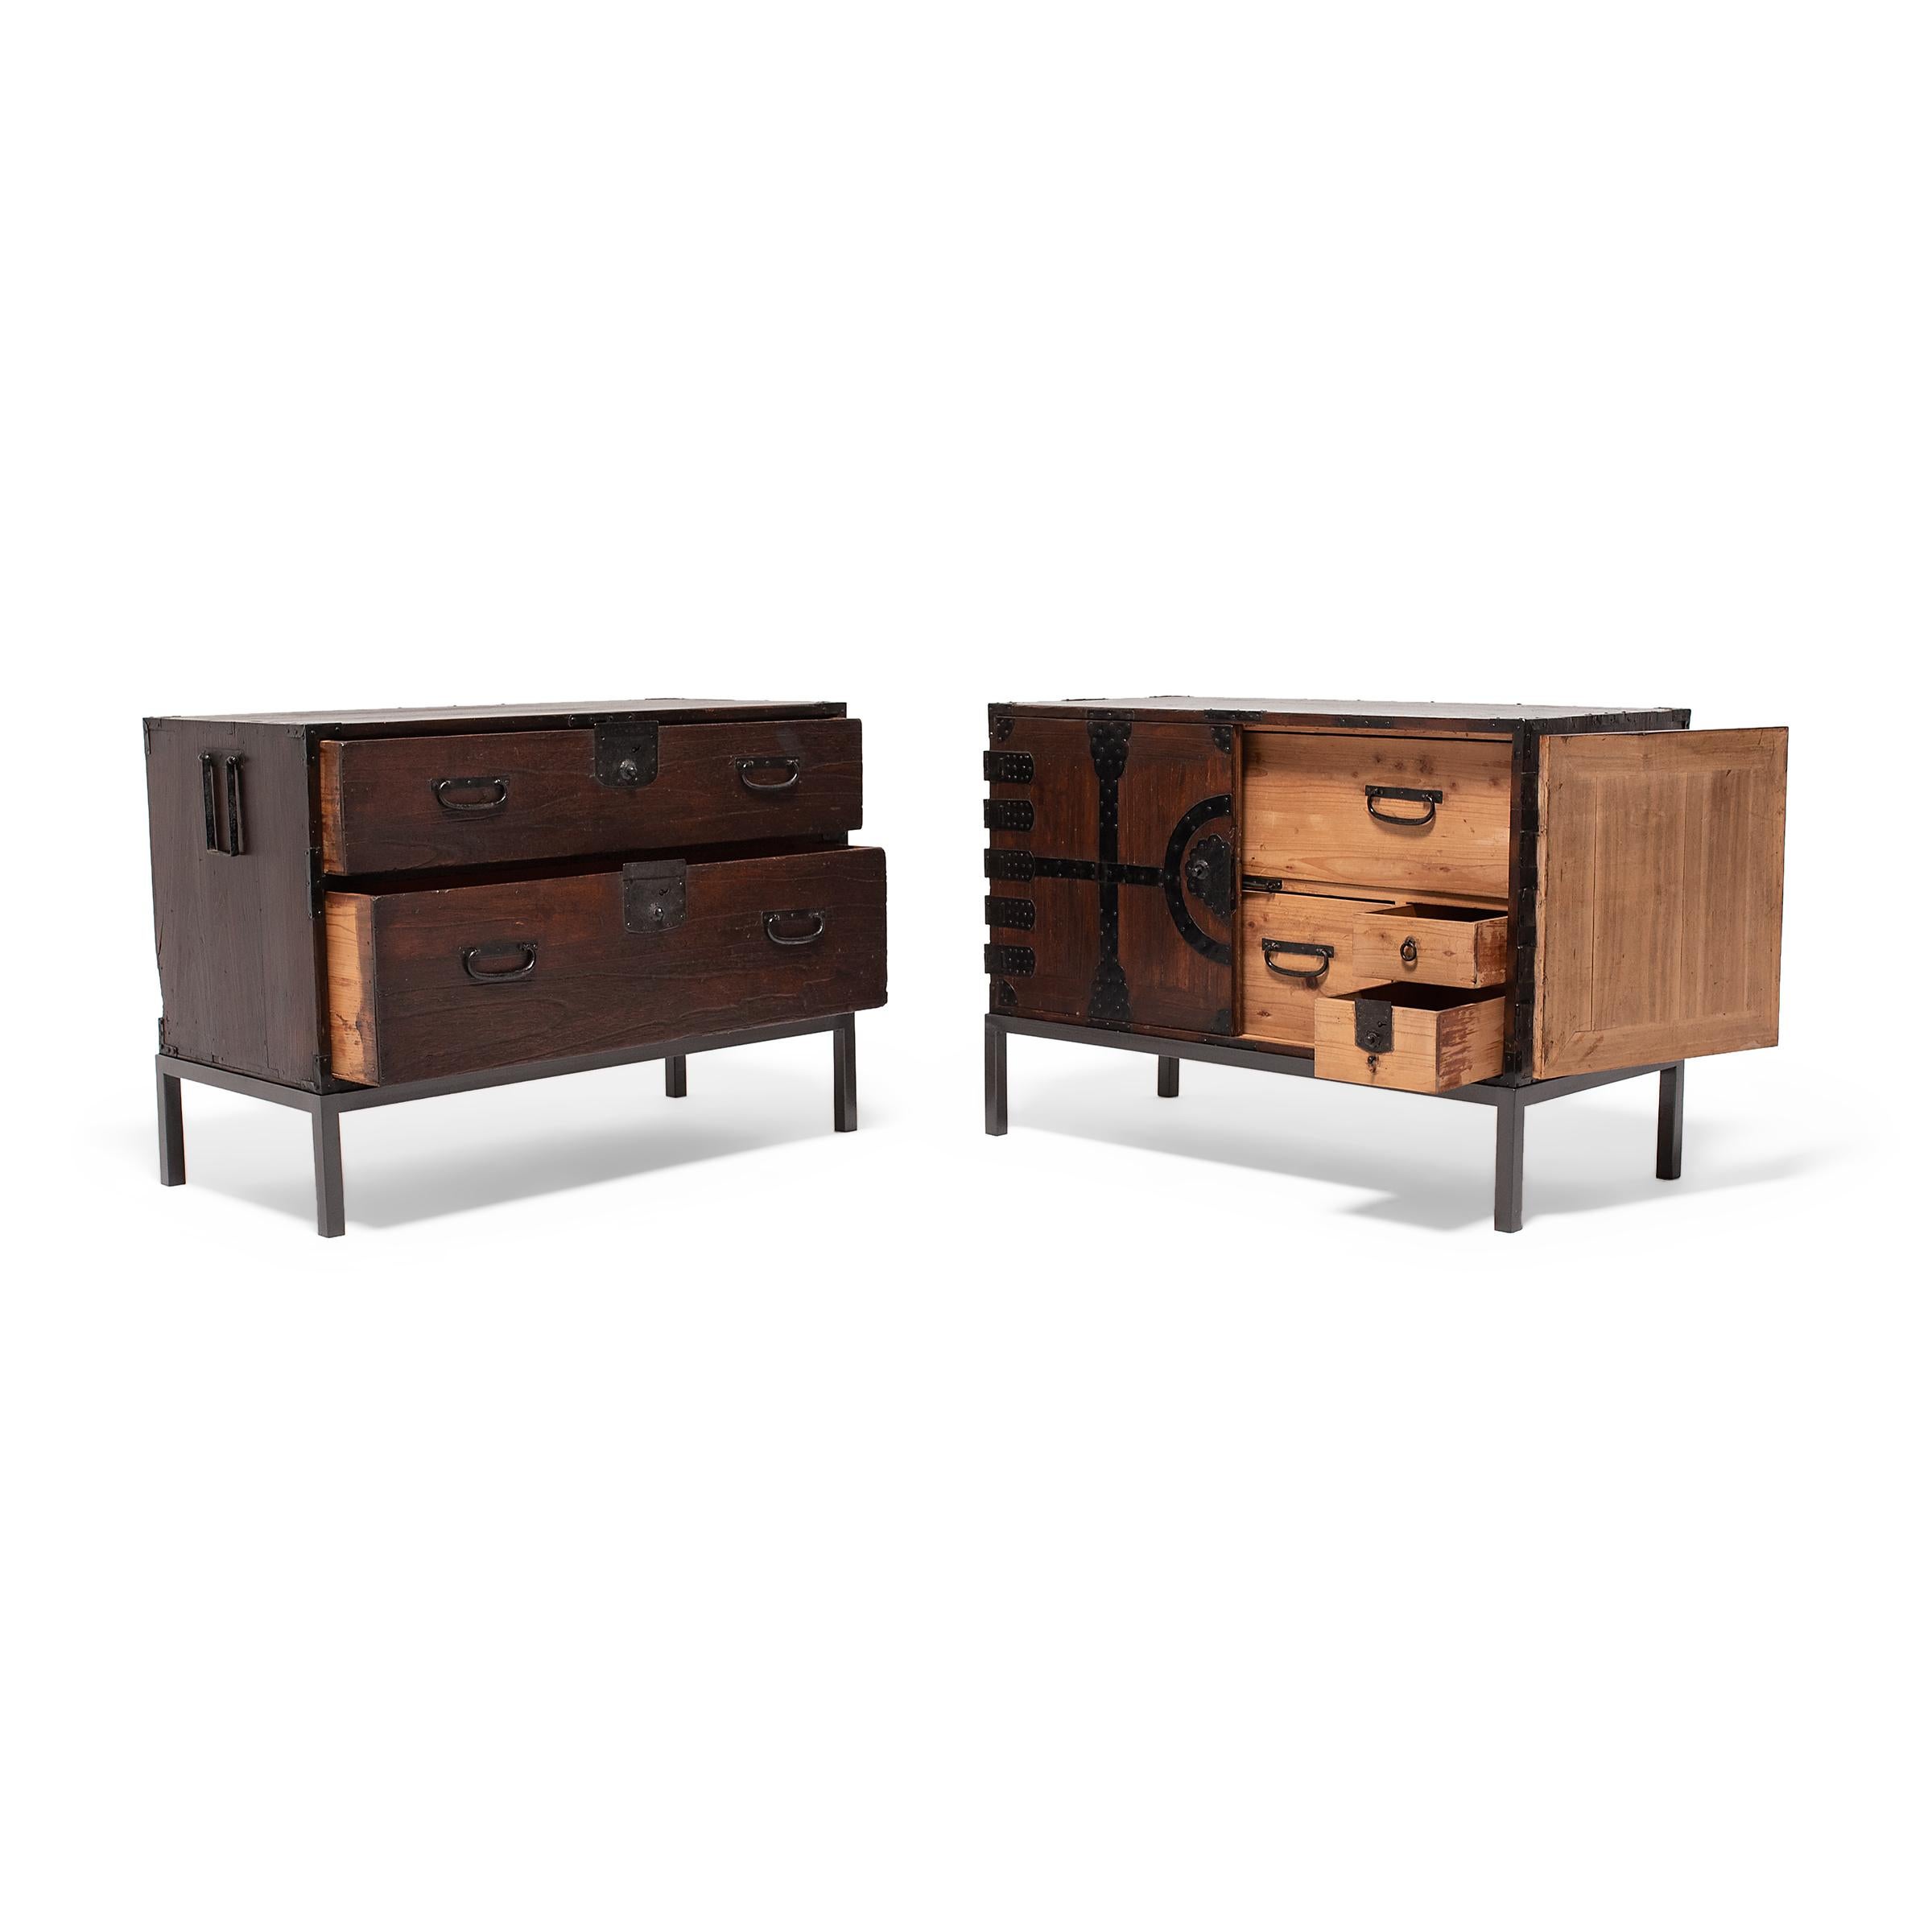 Designed to be versatile and portable, Japanese tansu chests were multipurpose storage cabinets that moved throughout the home as needed. This pair of low cabinets are two halves of a traditional stacking tansu used for storing clothes and bedding.